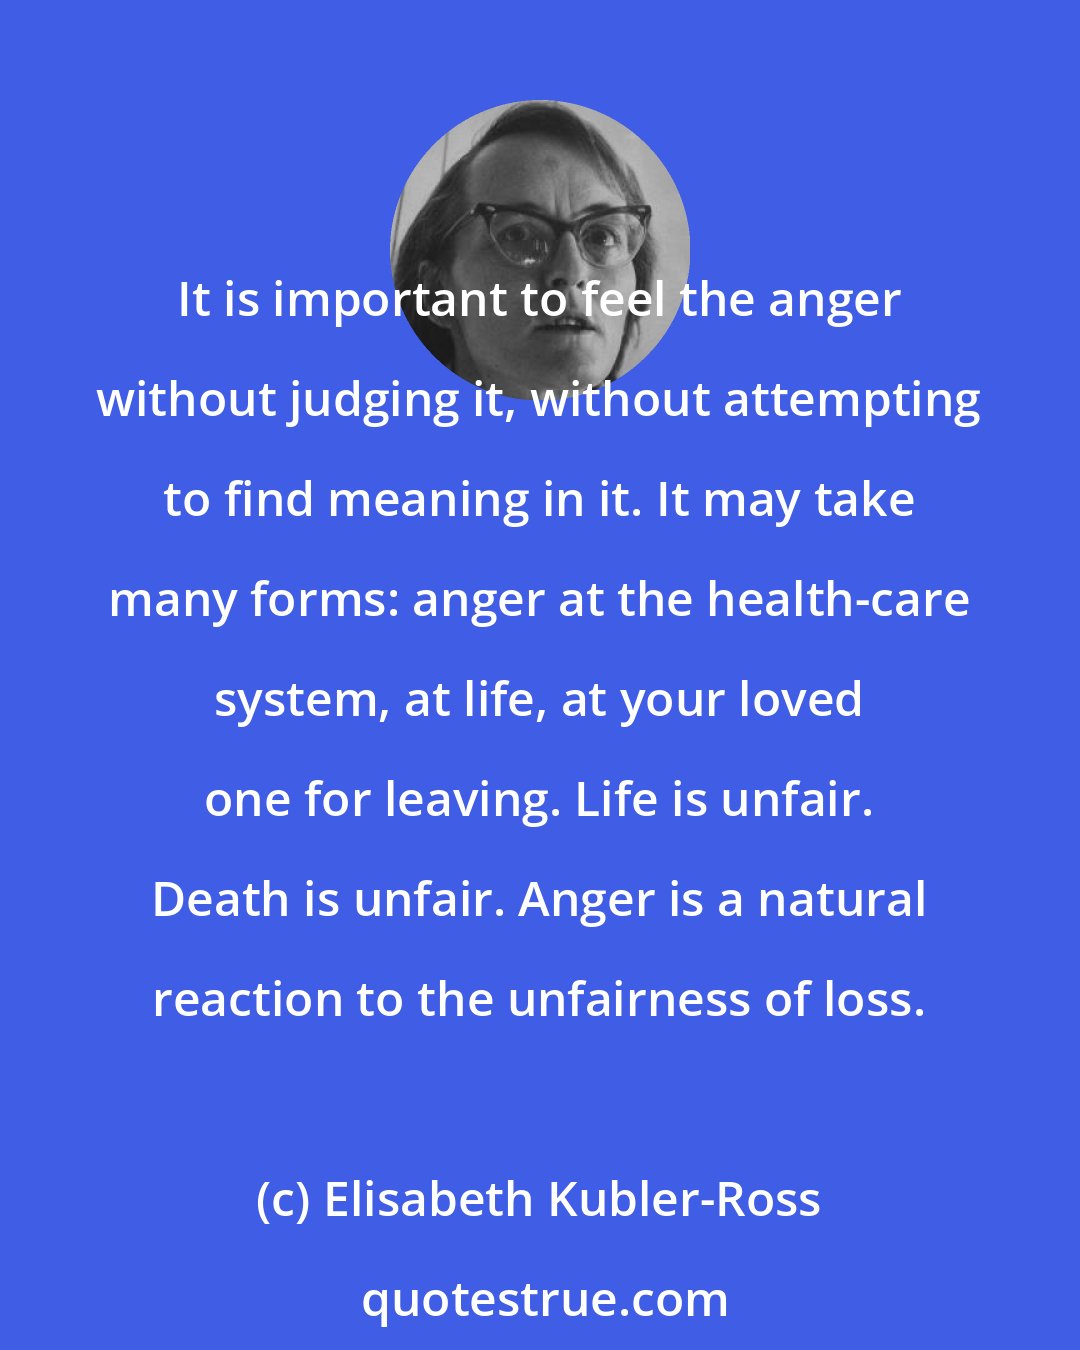 Elisabeth Kubler-Ross: It is important to feel the anger without judging it, without attempting to find meaning in it. It may take many forms: anger at the health-care system, at life, at your loved one for leaving. Life is unfair. Death is unfair. Anger is a natural reaction to the unfairness of loss.